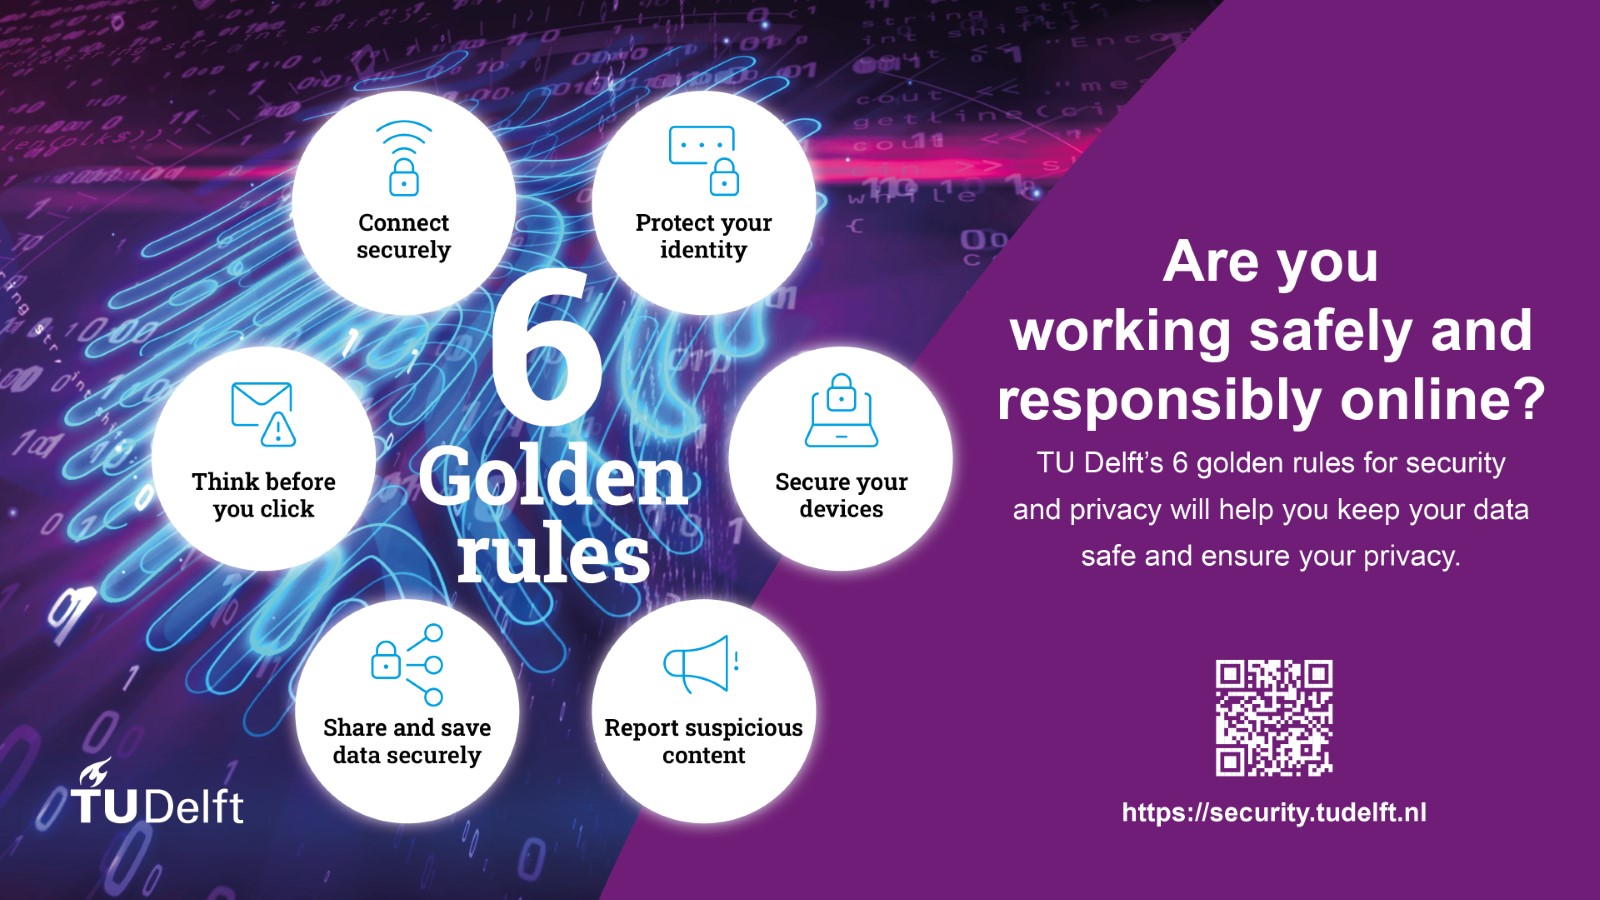 Are you working safely and responsibly online? TU Delft's 6 golden rules for security and privacy will help you keep your data safe and ensure your privacy. The Six golden rules are: connect securely, protect your identity, secure your devices, report suspicious content, share and save data securely, think before you click. For more information: security.tudelft.nl